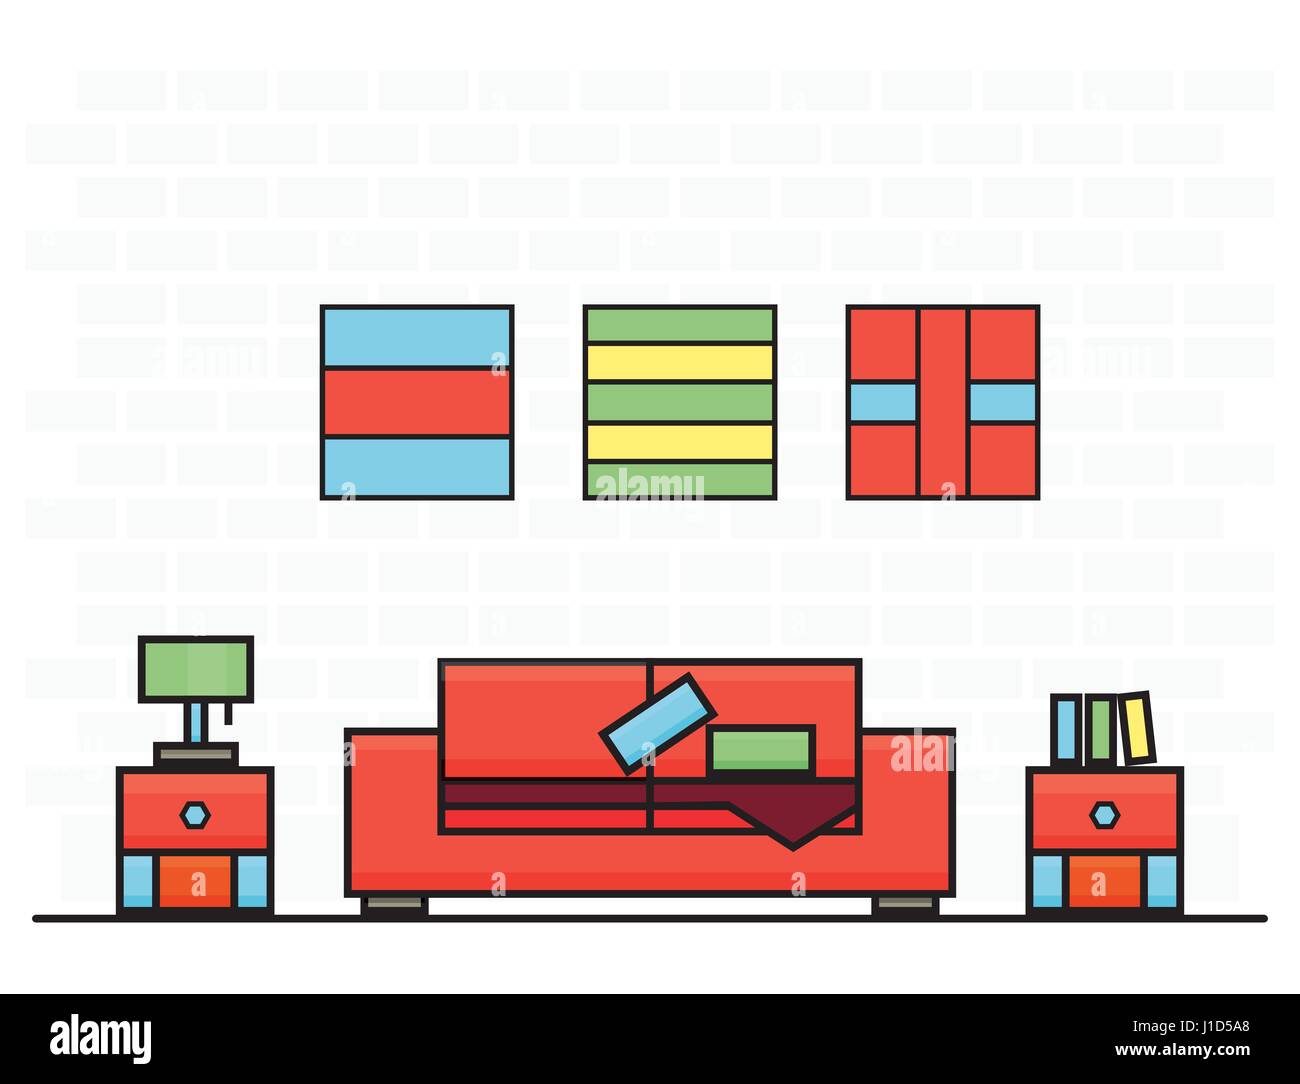 Red Sofa with Two Curbstones. Vector Illustration. Room Interior. Stock Vector